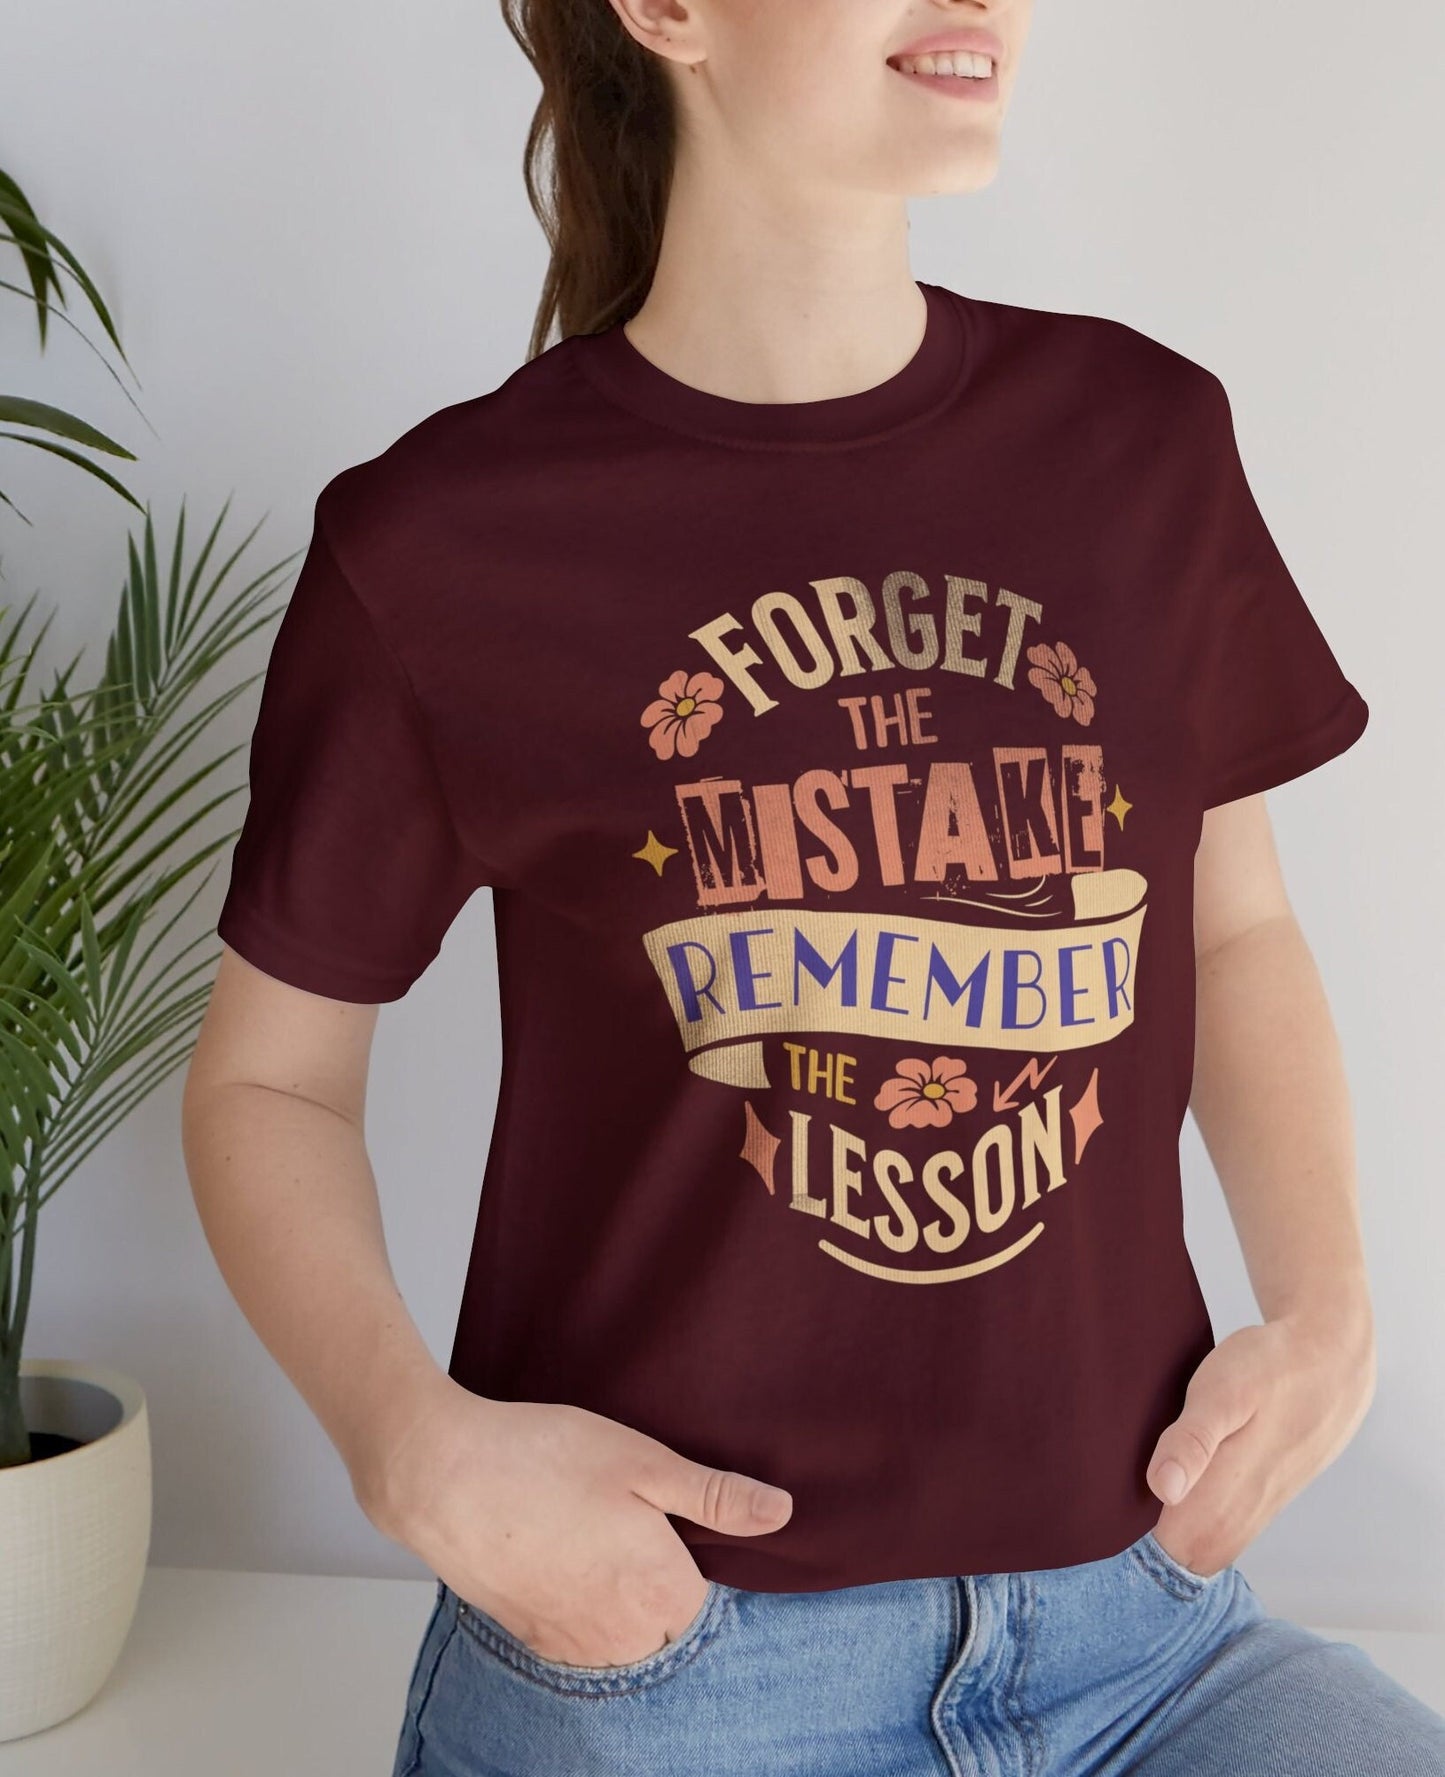 Forget the Mistake Remember the Lesson shirt, Mental Health T-shirt, Positive Tee